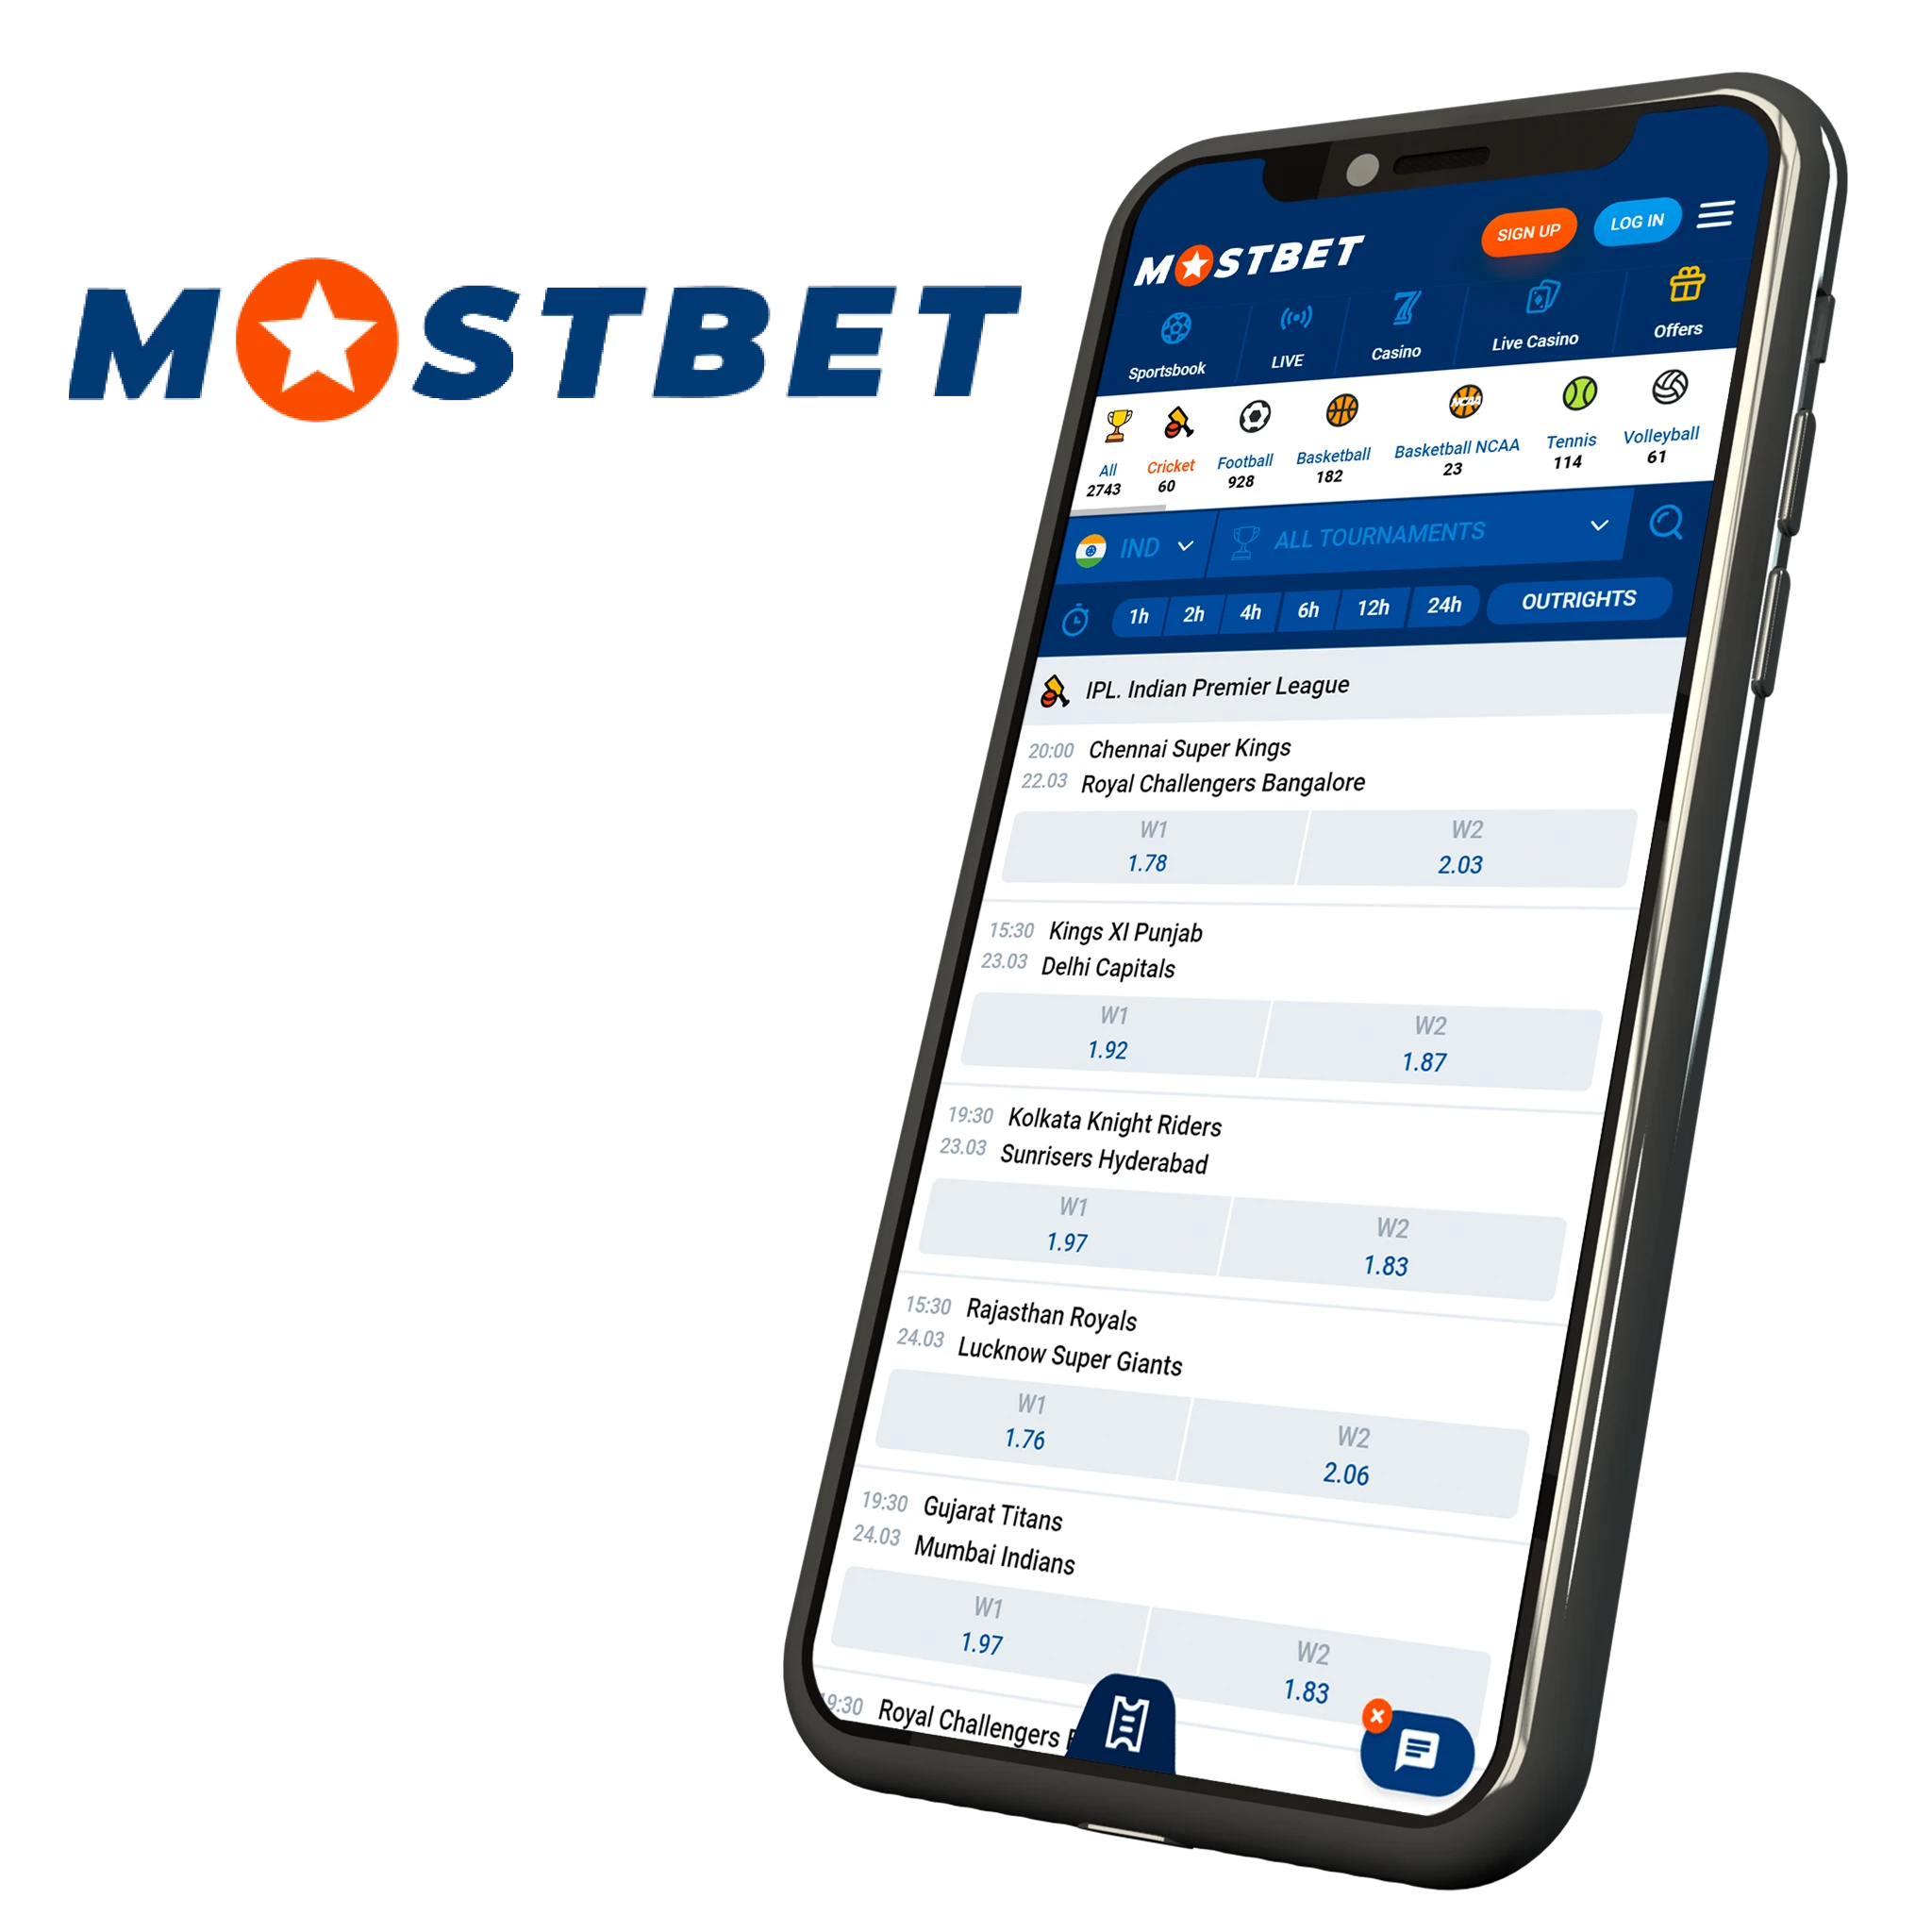 Mostbet app for IPL provides a convenient platform for cricket fans to enjoy seamless and rewarding betting.